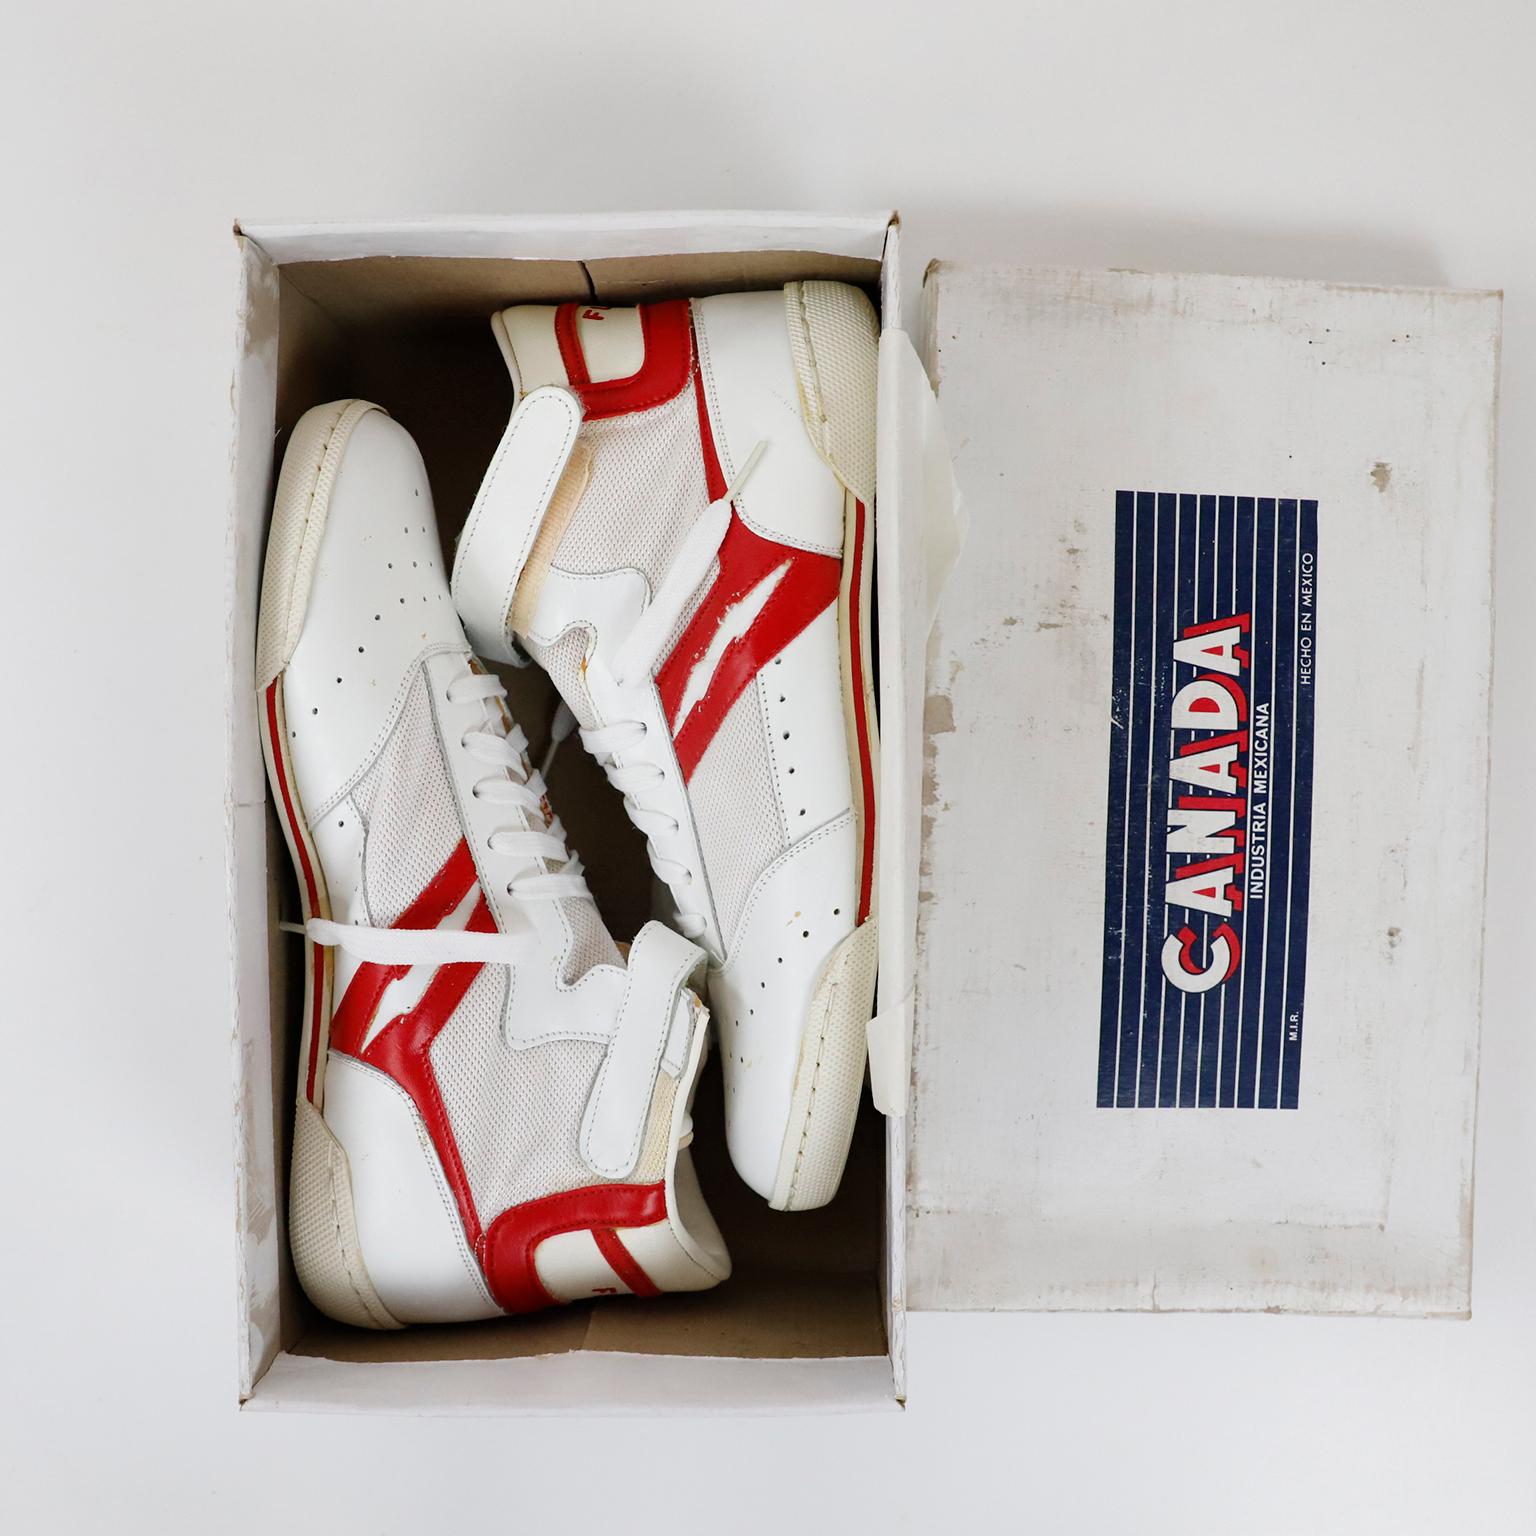 We offer this unique pair of never used Canada sneakers with original box, circa 1970
About Canada:
Canada was a very successful Mexican shoes and sneakers brand, during the 1970s and 1980s.
In the book Shoe Dog, in which Phil Knight, the